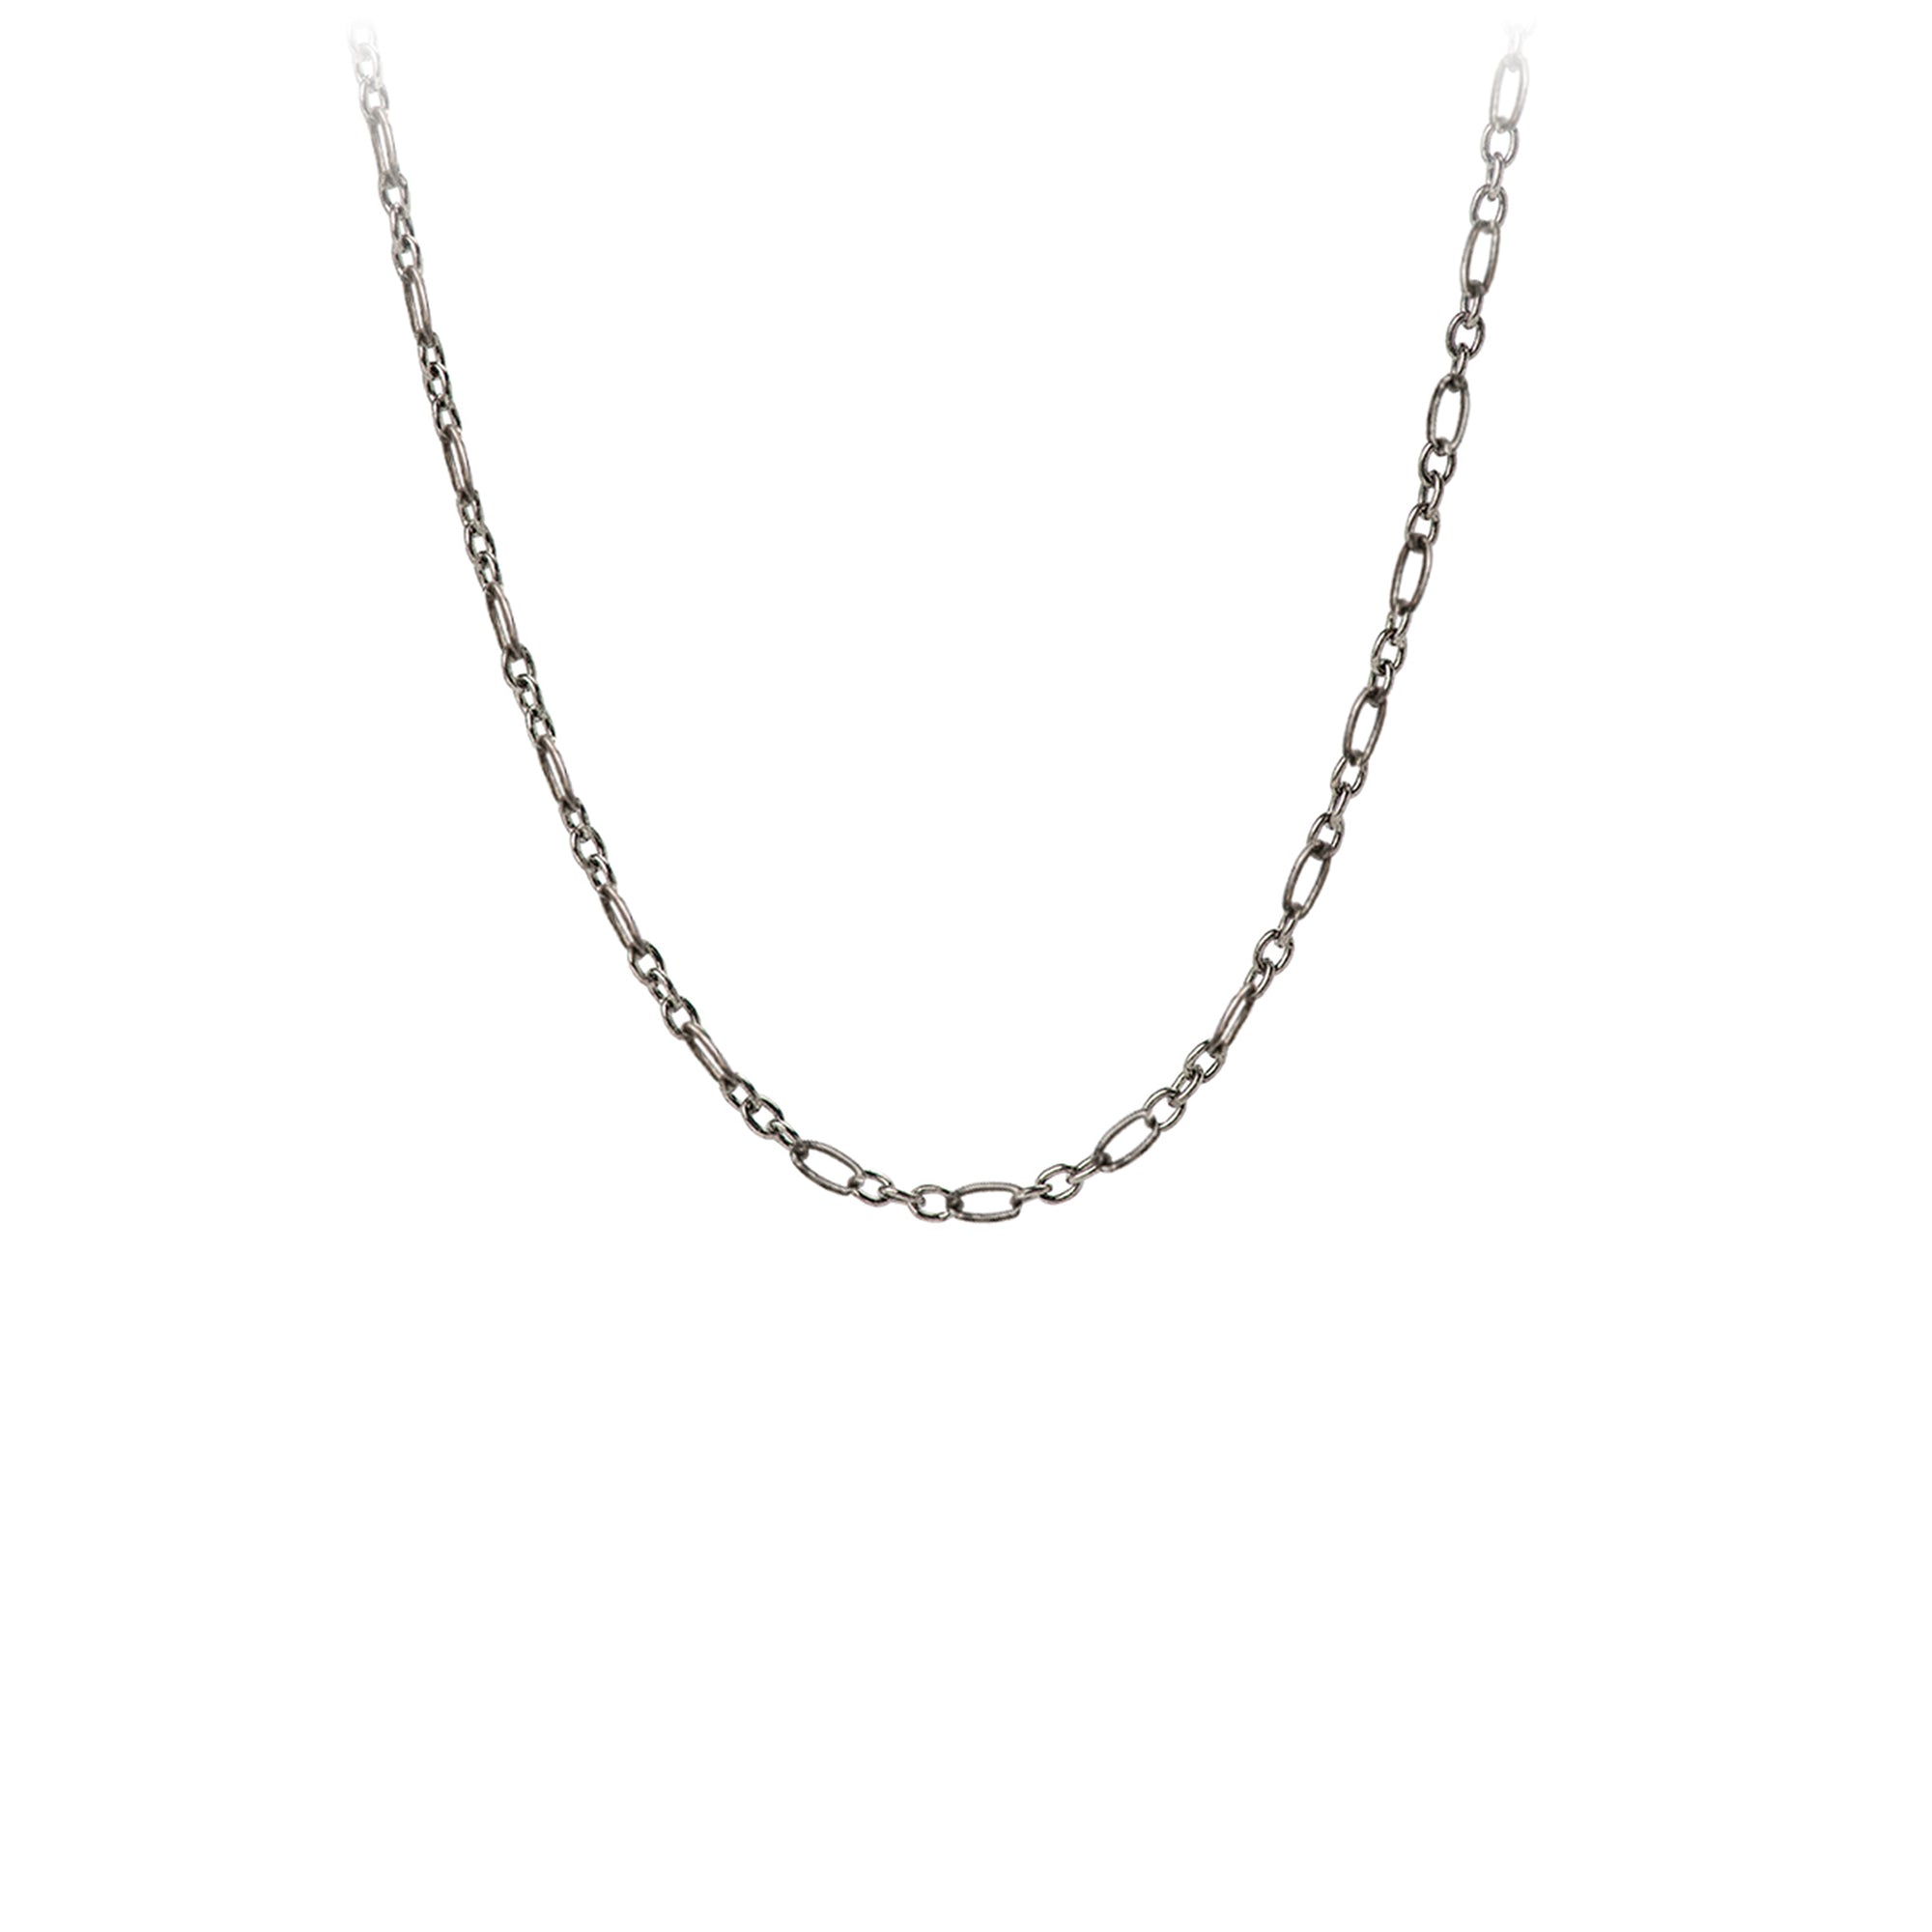 A sterling silver chain with medium oxidized anchor links